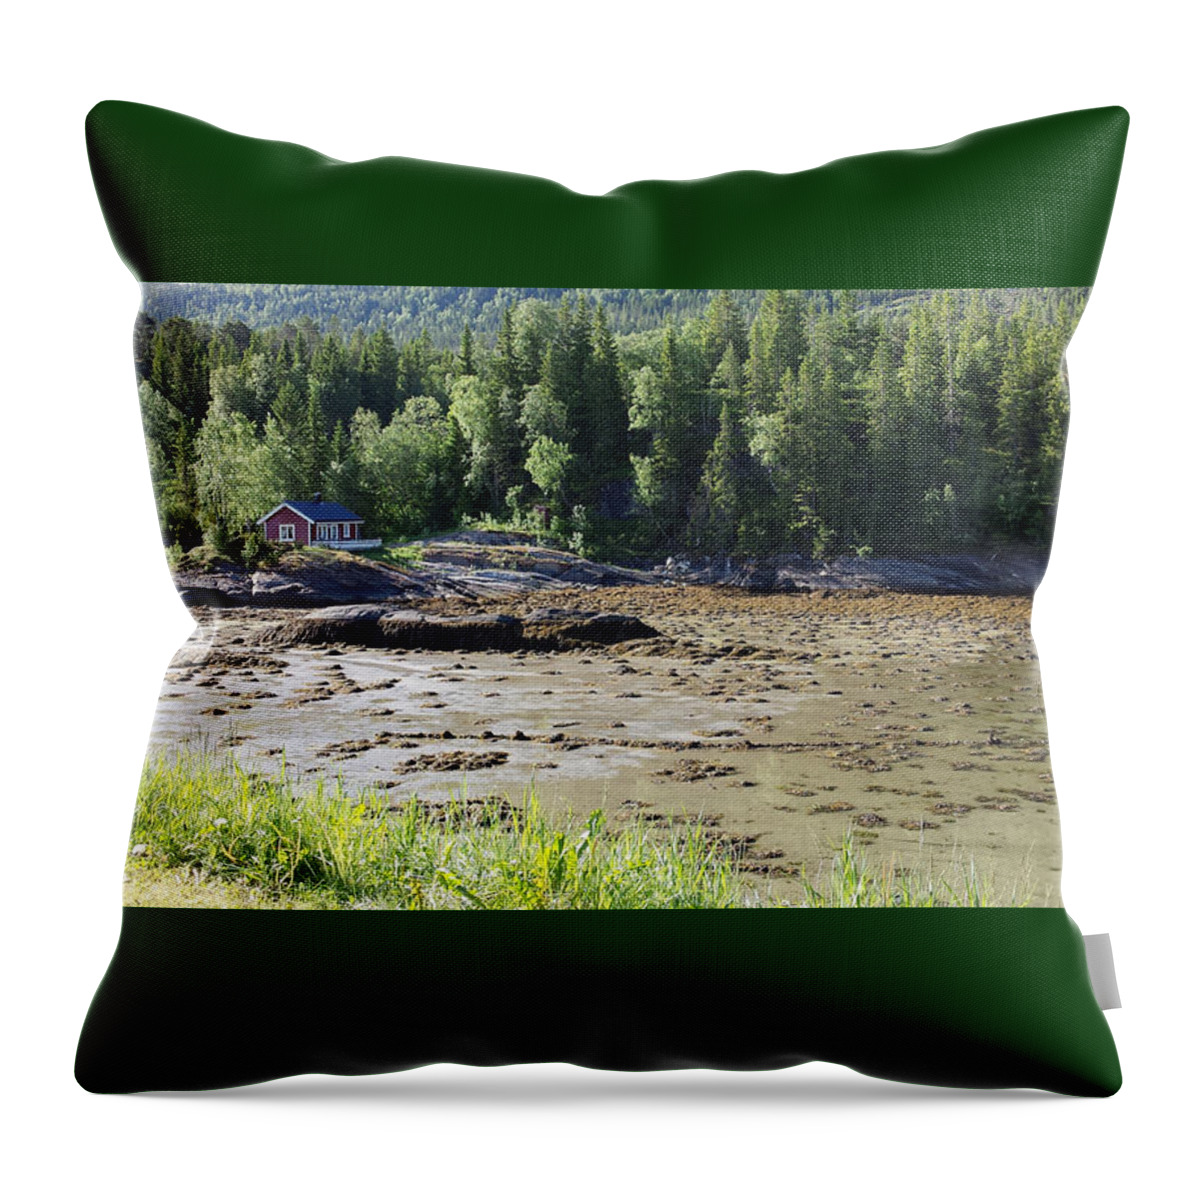 Fjord Throw Pillow featuring the mixed media Fjord Norway by Joelle Philibert